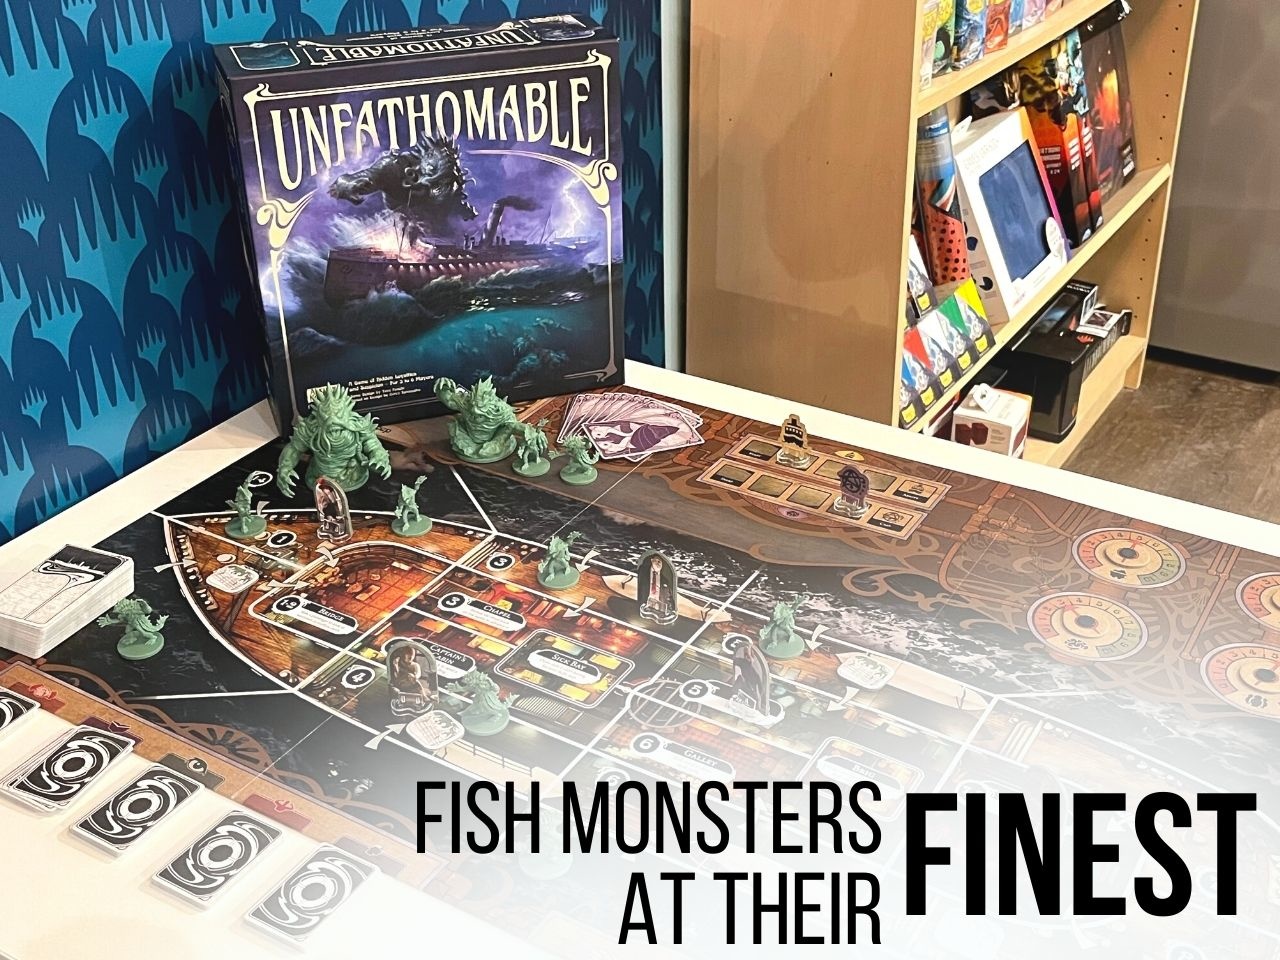 Unfathomable: Treachery, Art Deco, and Fish Monsters at their Finest